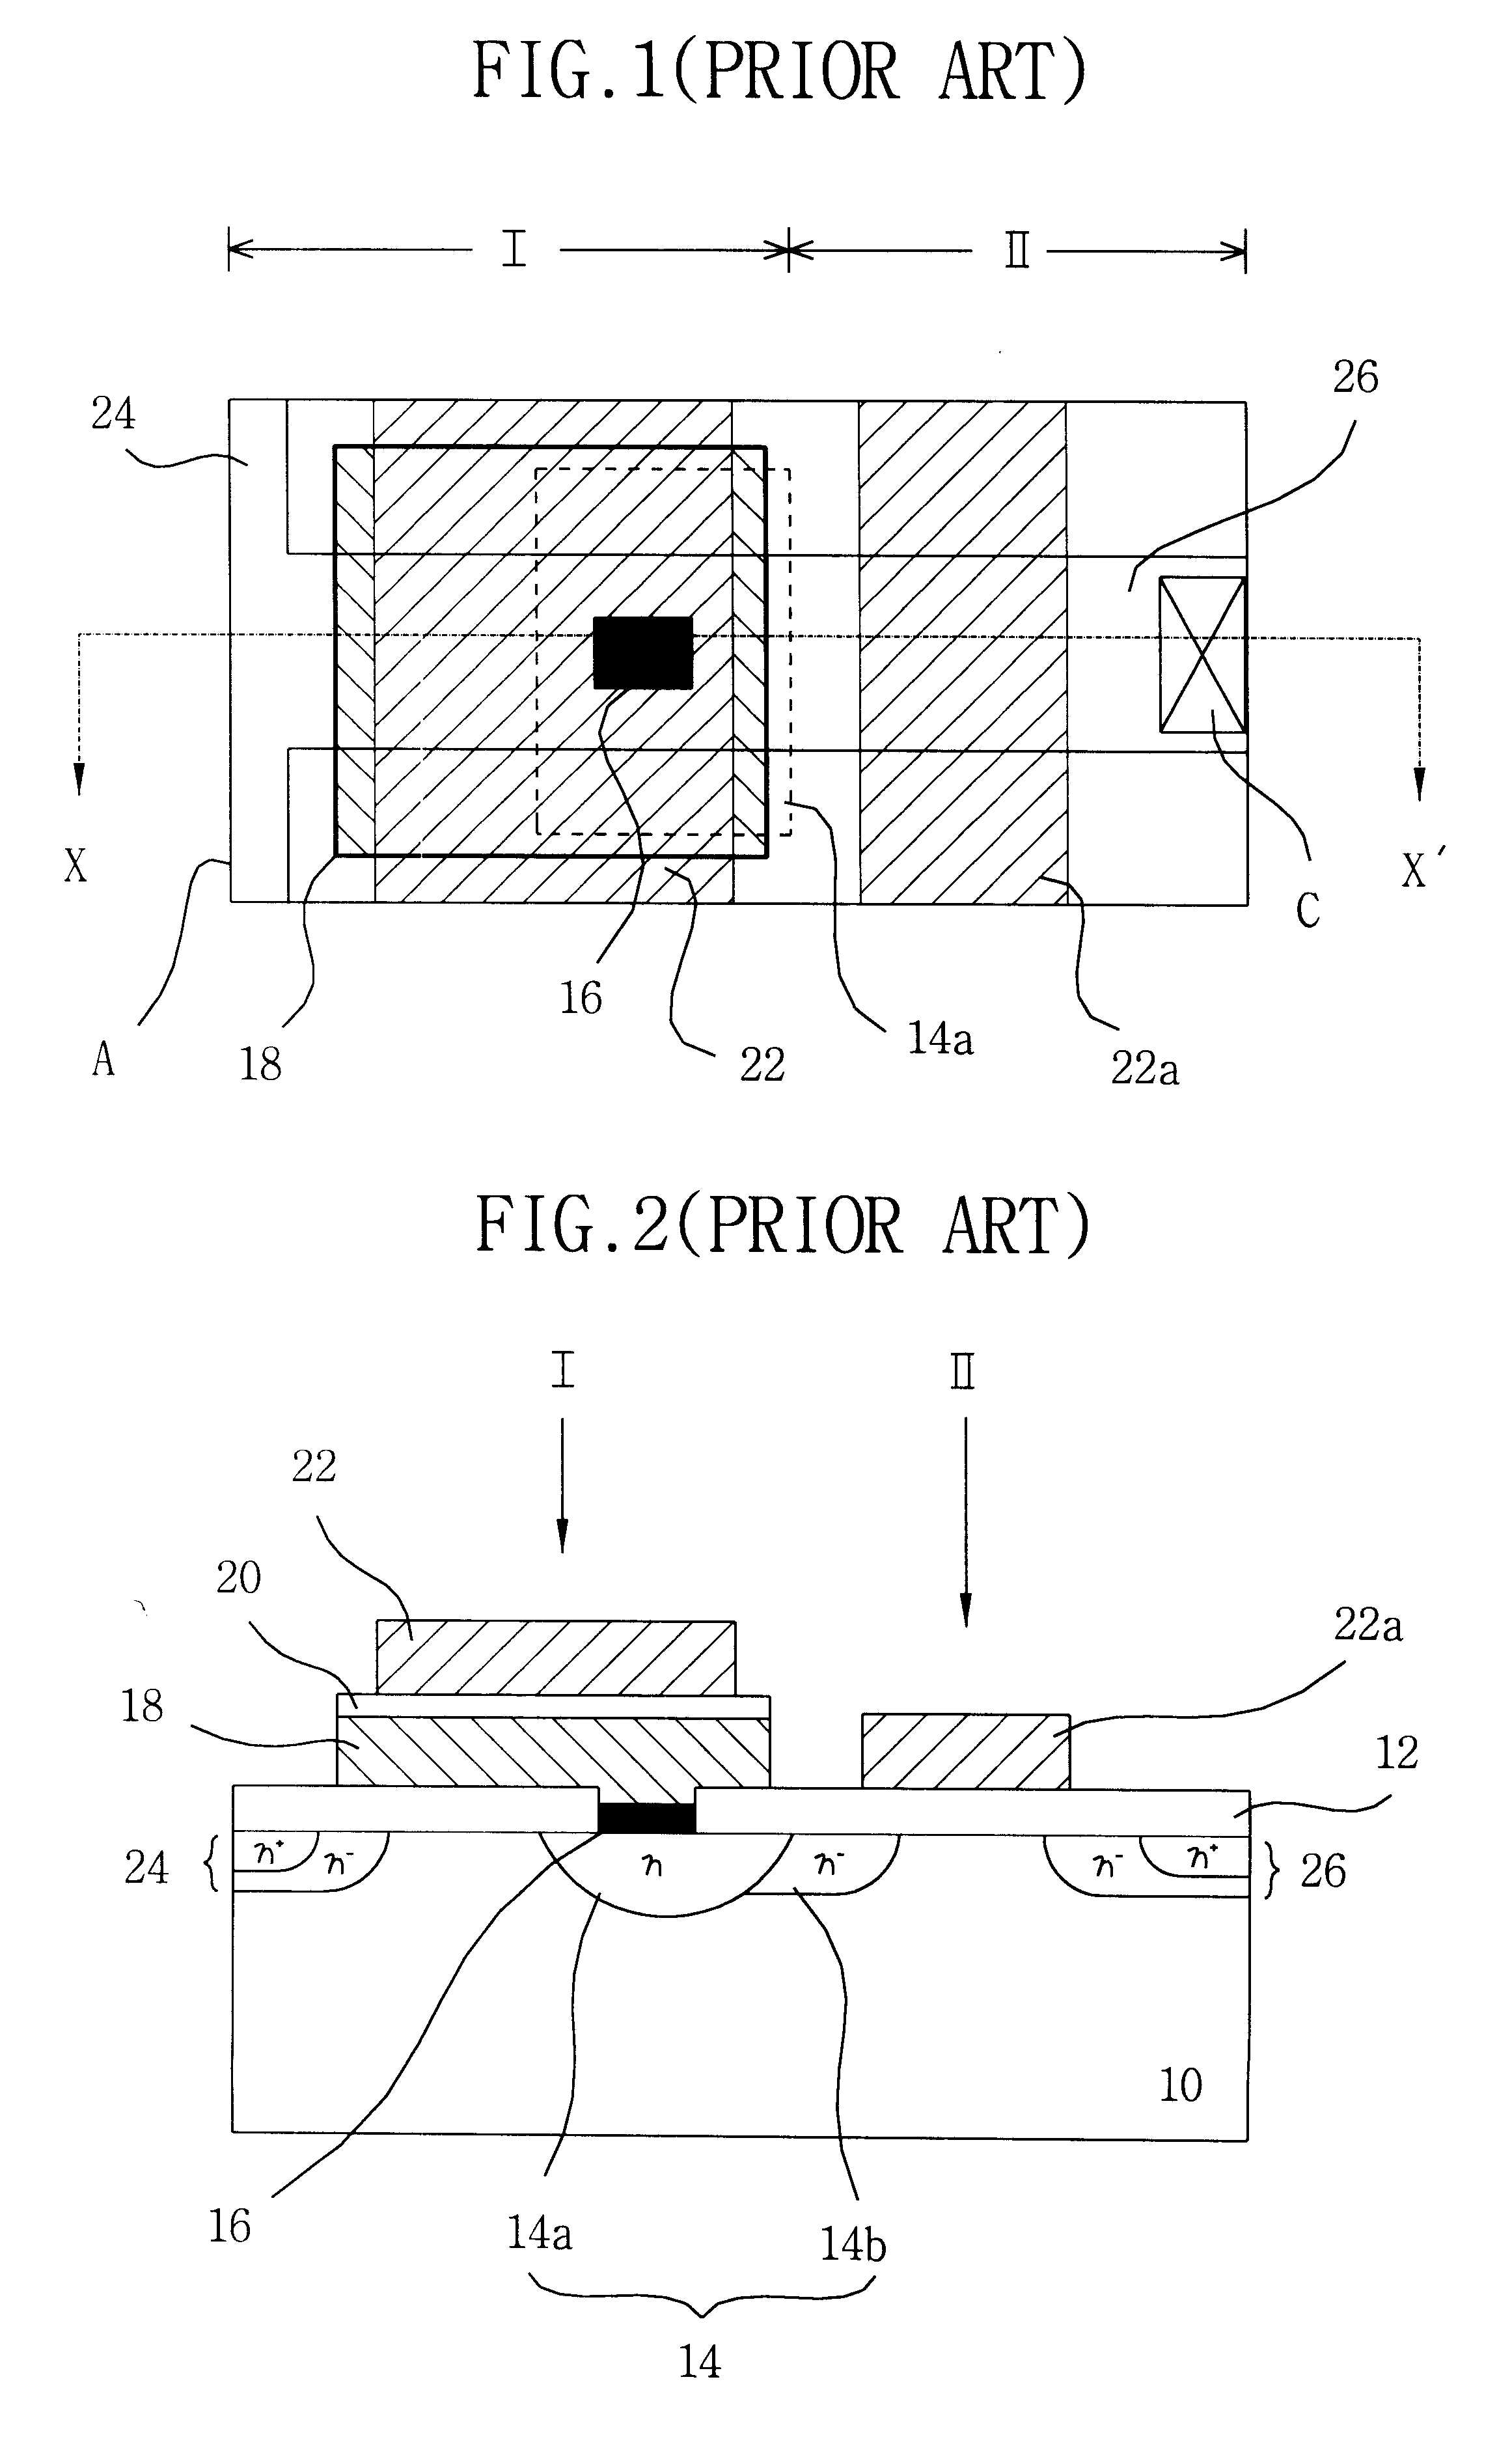 Non-volatile memory device with single-layered overwriting transistor